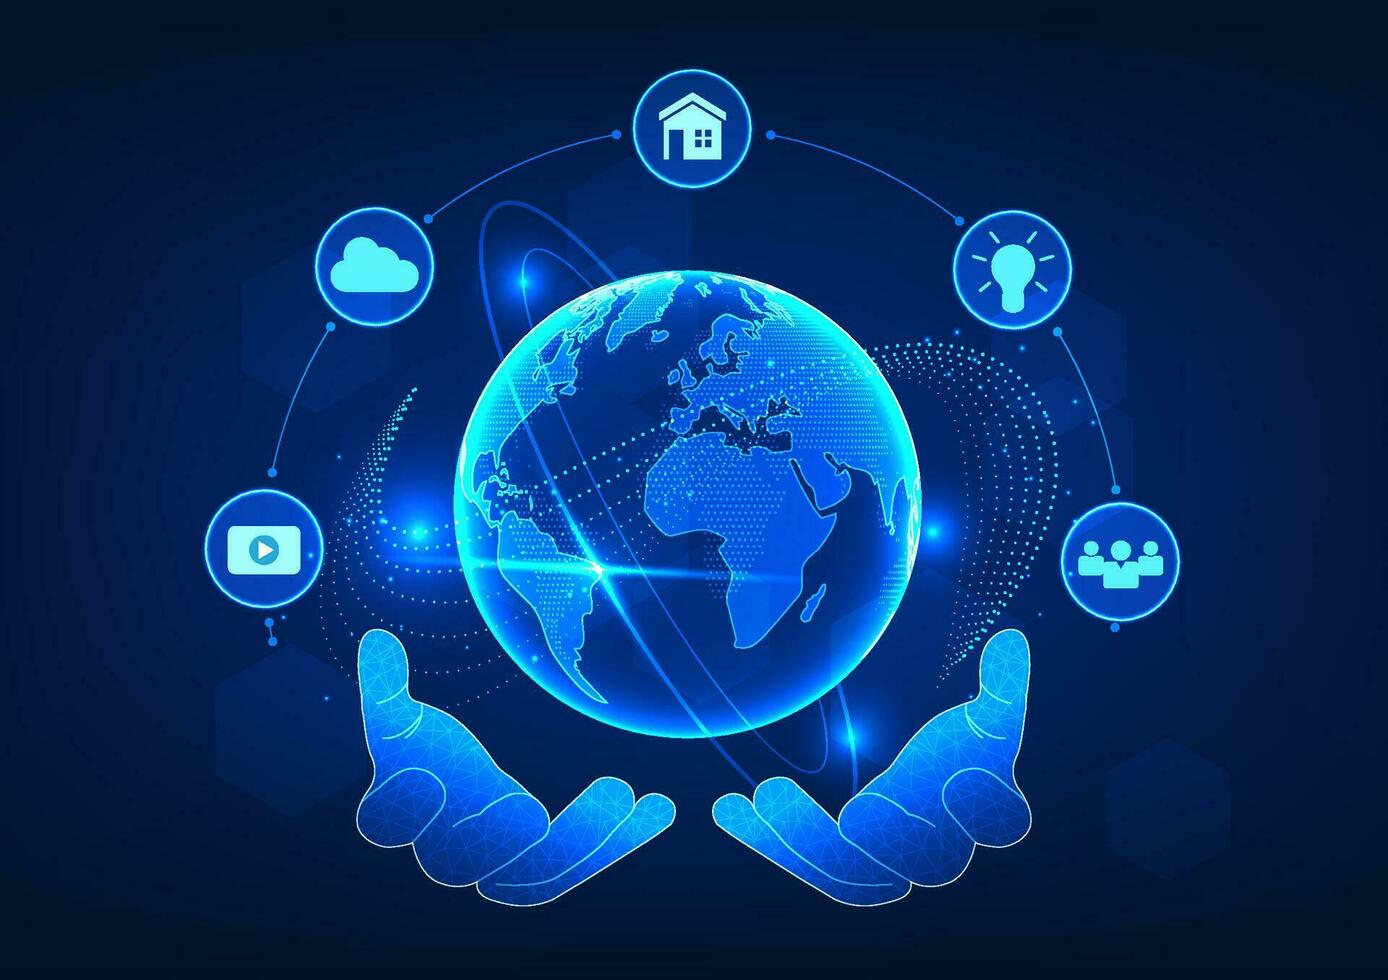 World technology, two hands holding the globe along with icons It communicates that technology reaches people all over the world. Access to communication information and doing international business vector